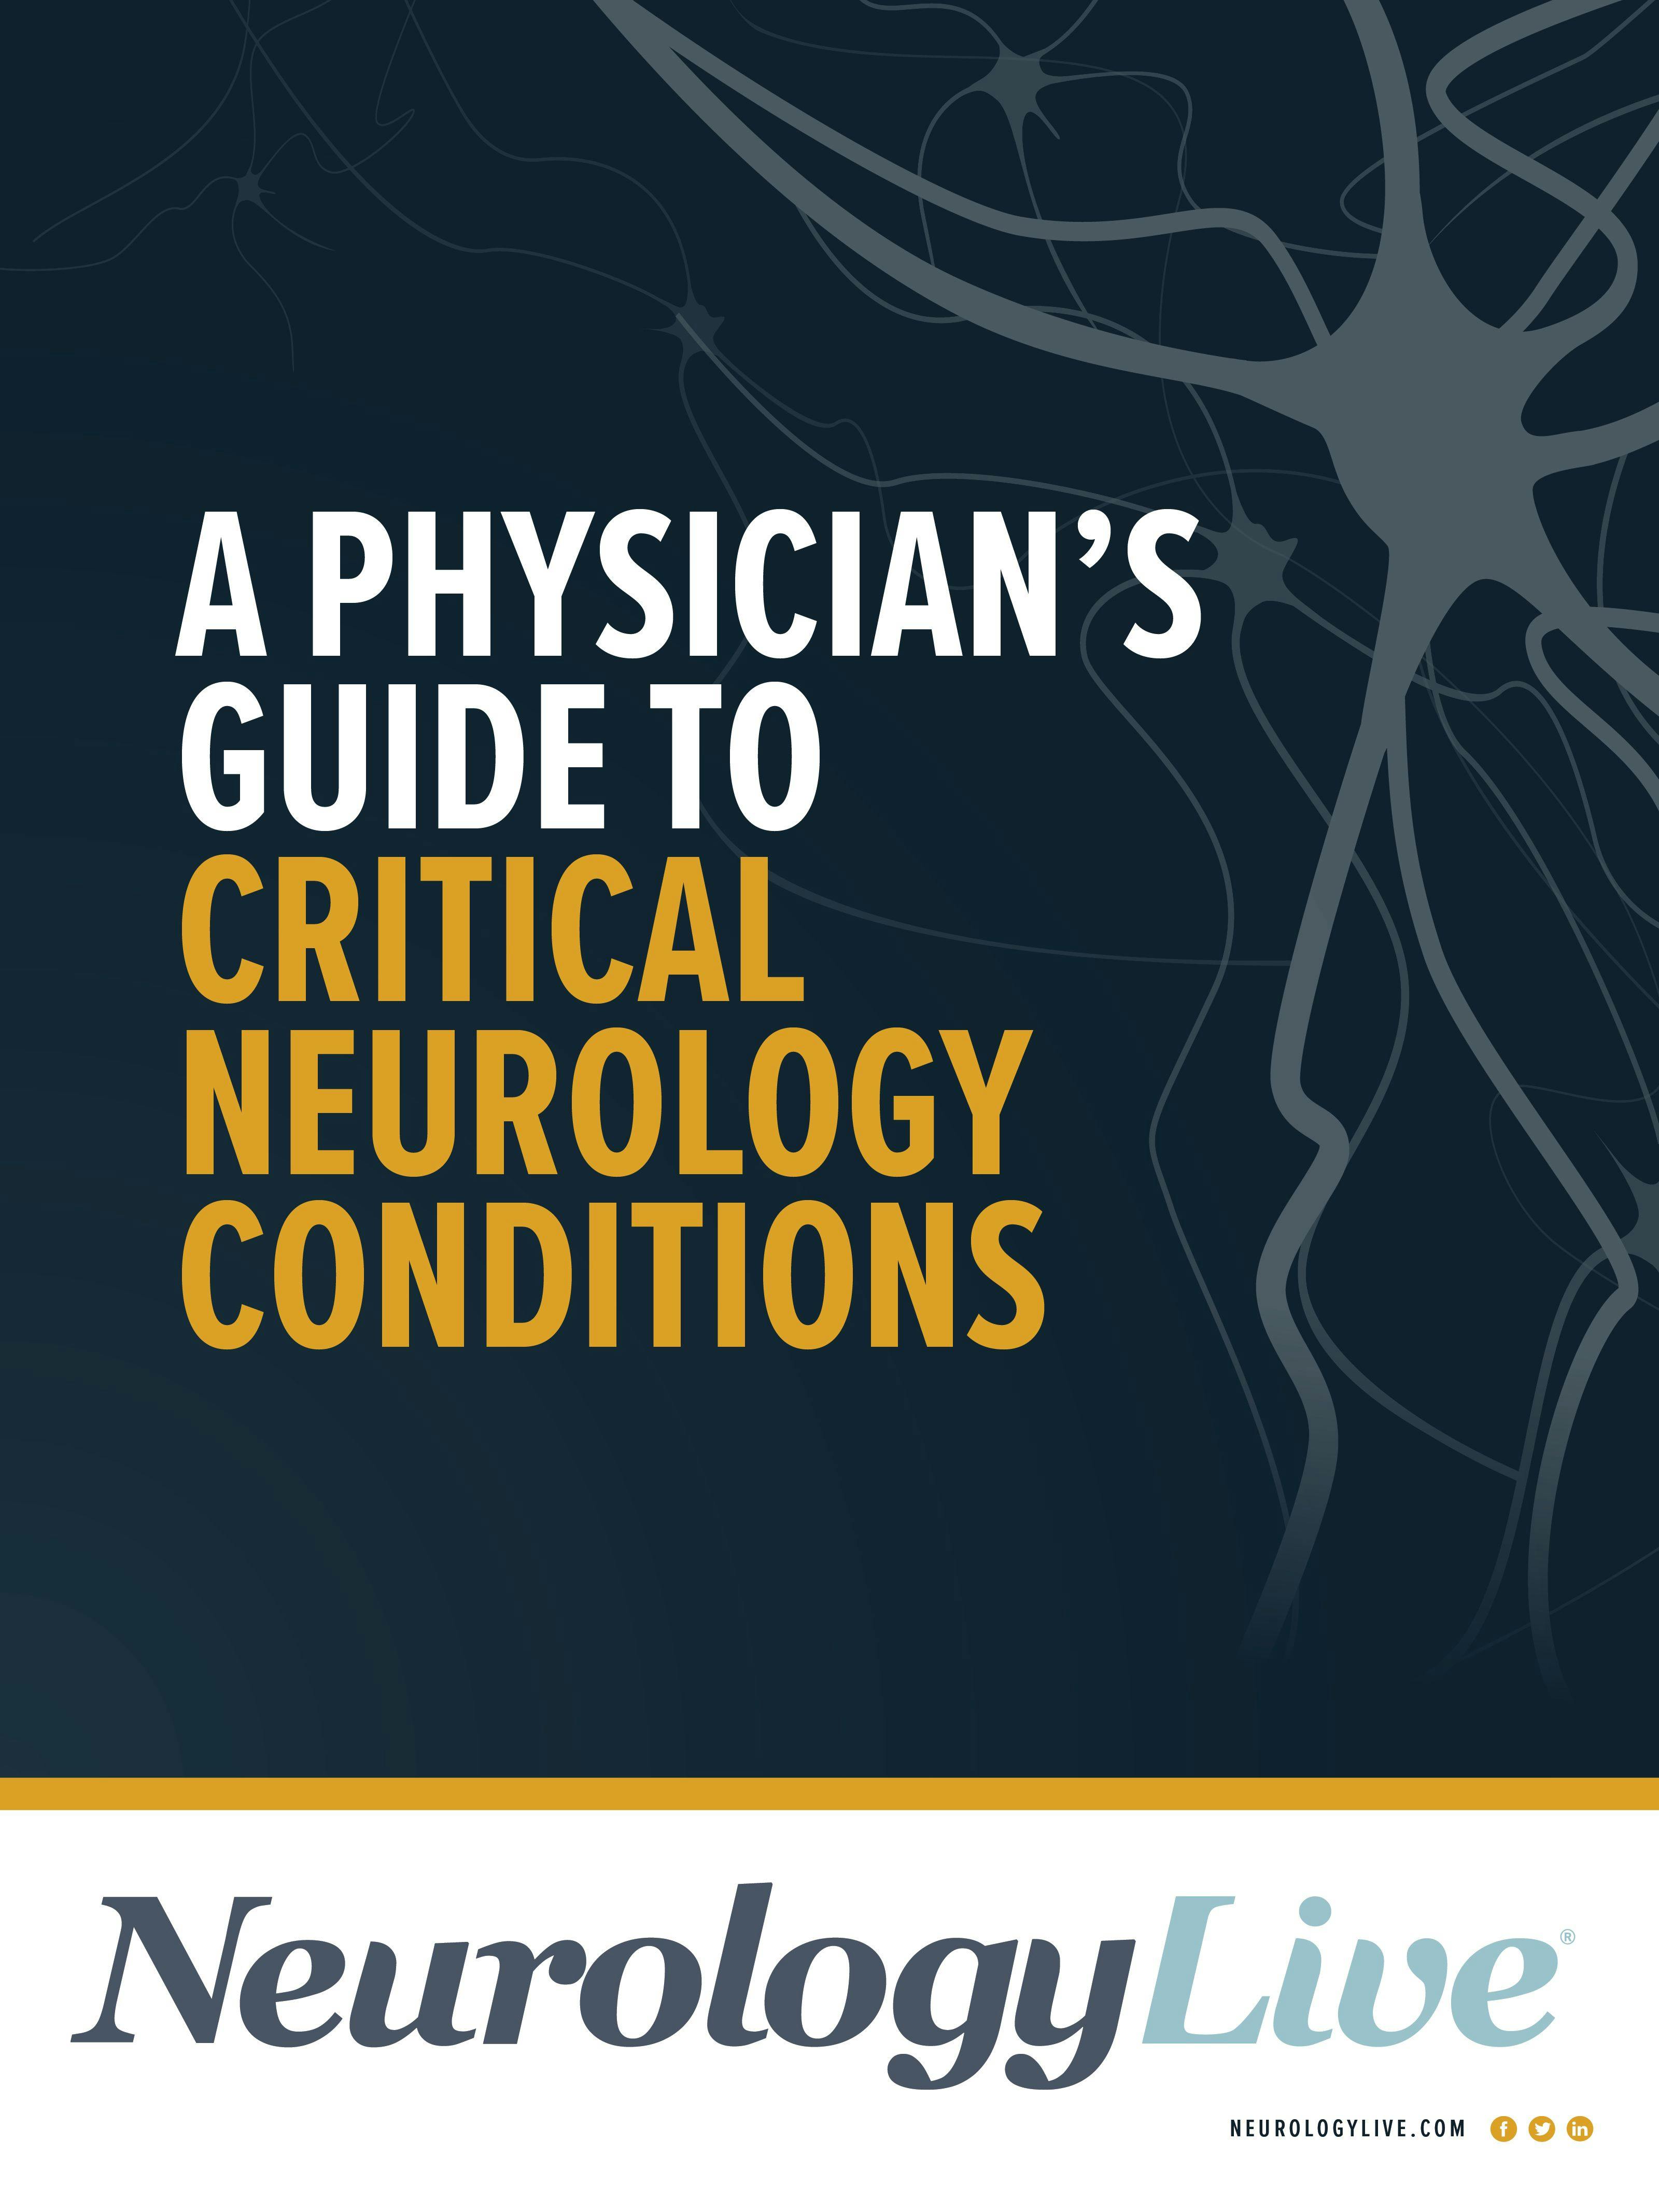 A Physician's Guide to Critical Neurology Conditions eBook